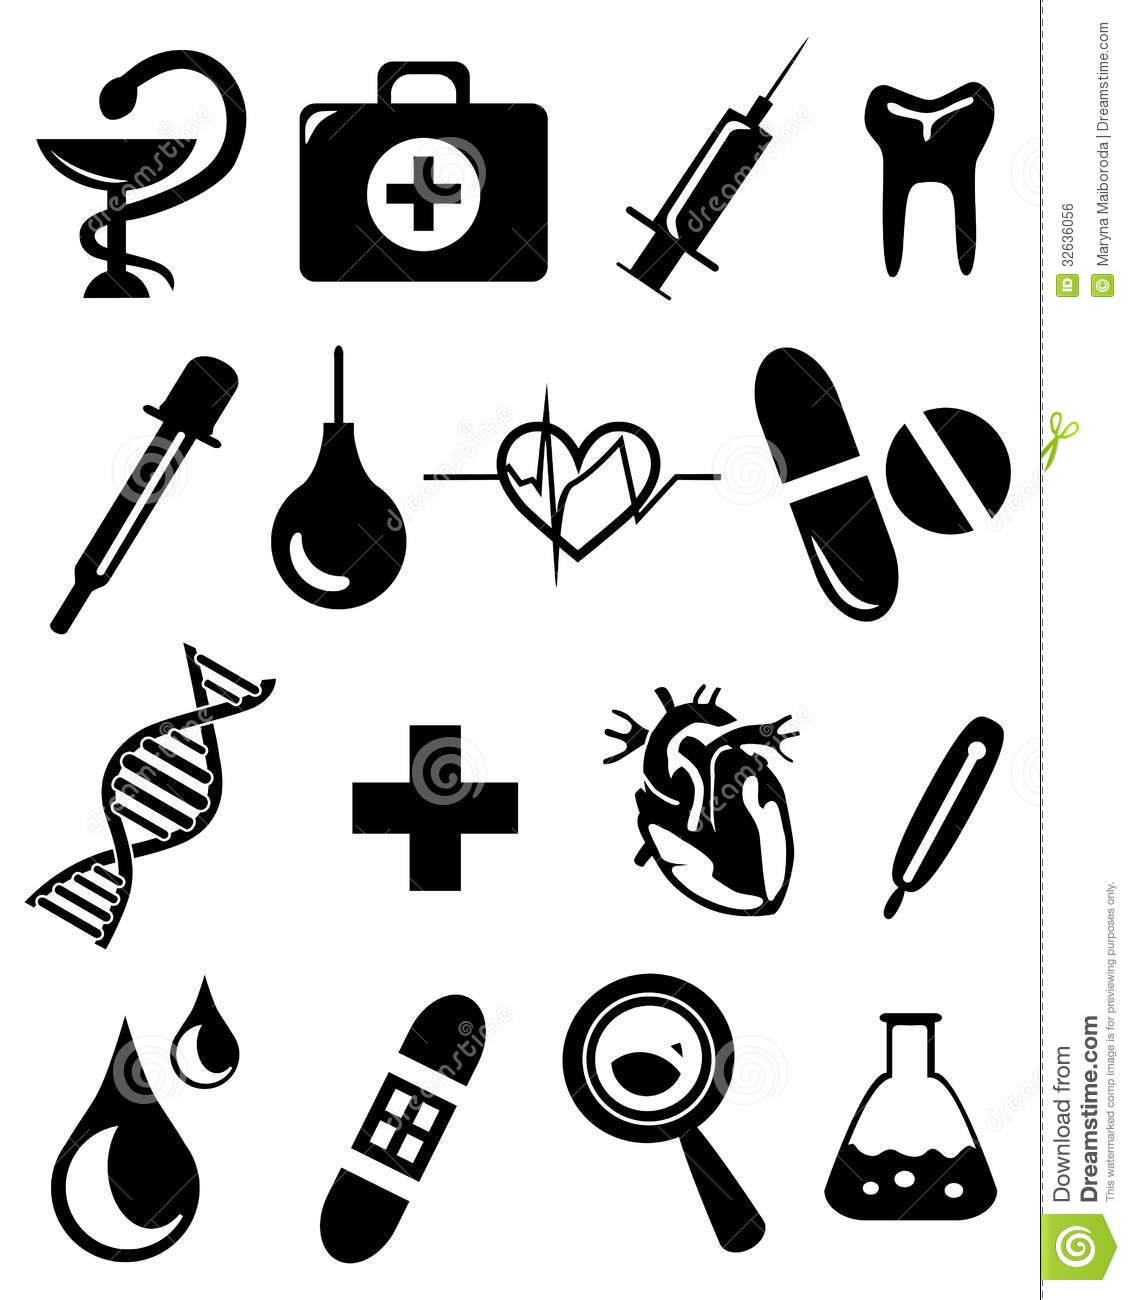 Medical Icons Black and White